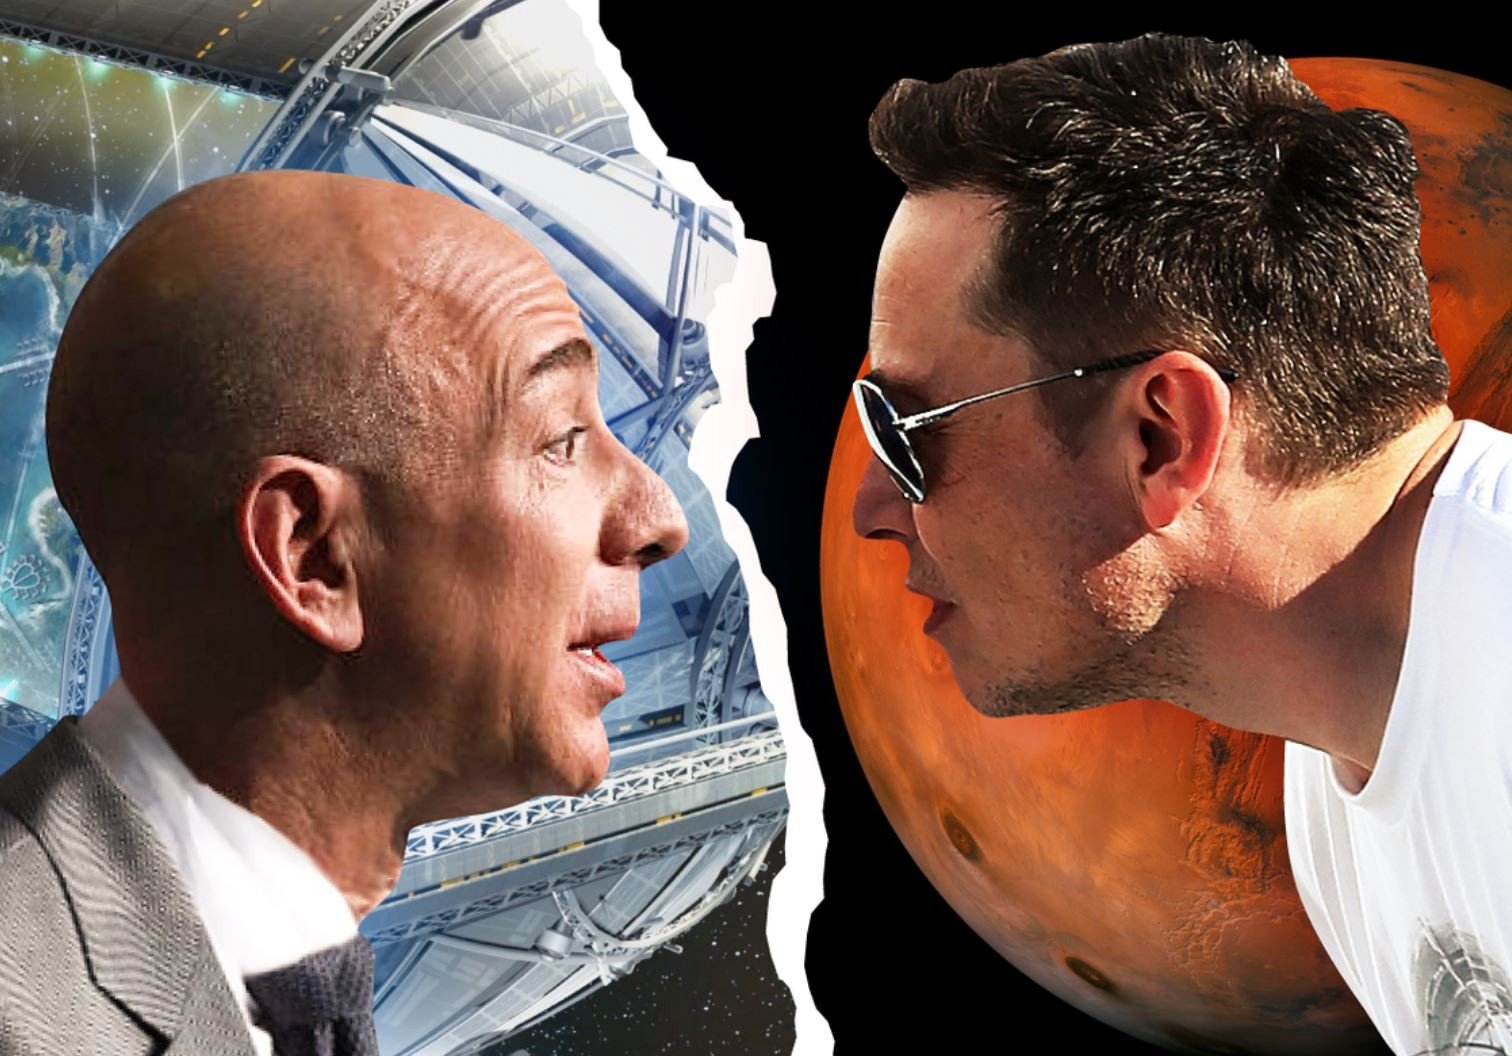 Jeff Bezos (left), founder of Blue Origin, and Elon Musk, founder of SpaceX, have been feuding for years over their rival plans for space exploration. Photos: Blue Origin/Nasa/Getty Images/Reuters/Business Insider